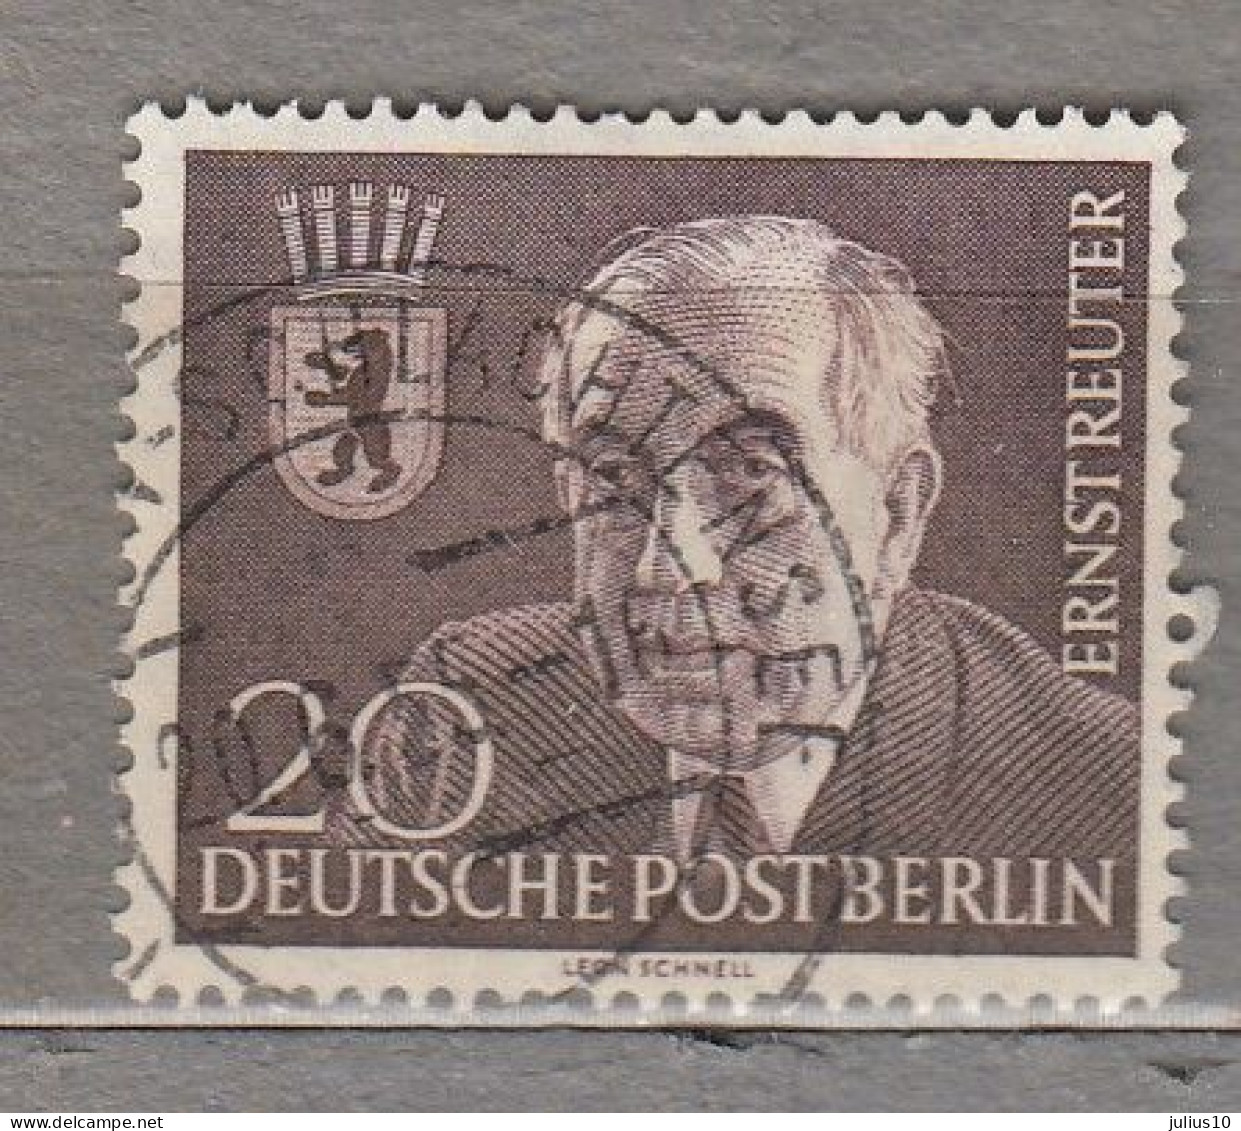 GERMANY BERLIN 1954 Used (o) Mi 115 #33973 - Used Stamps